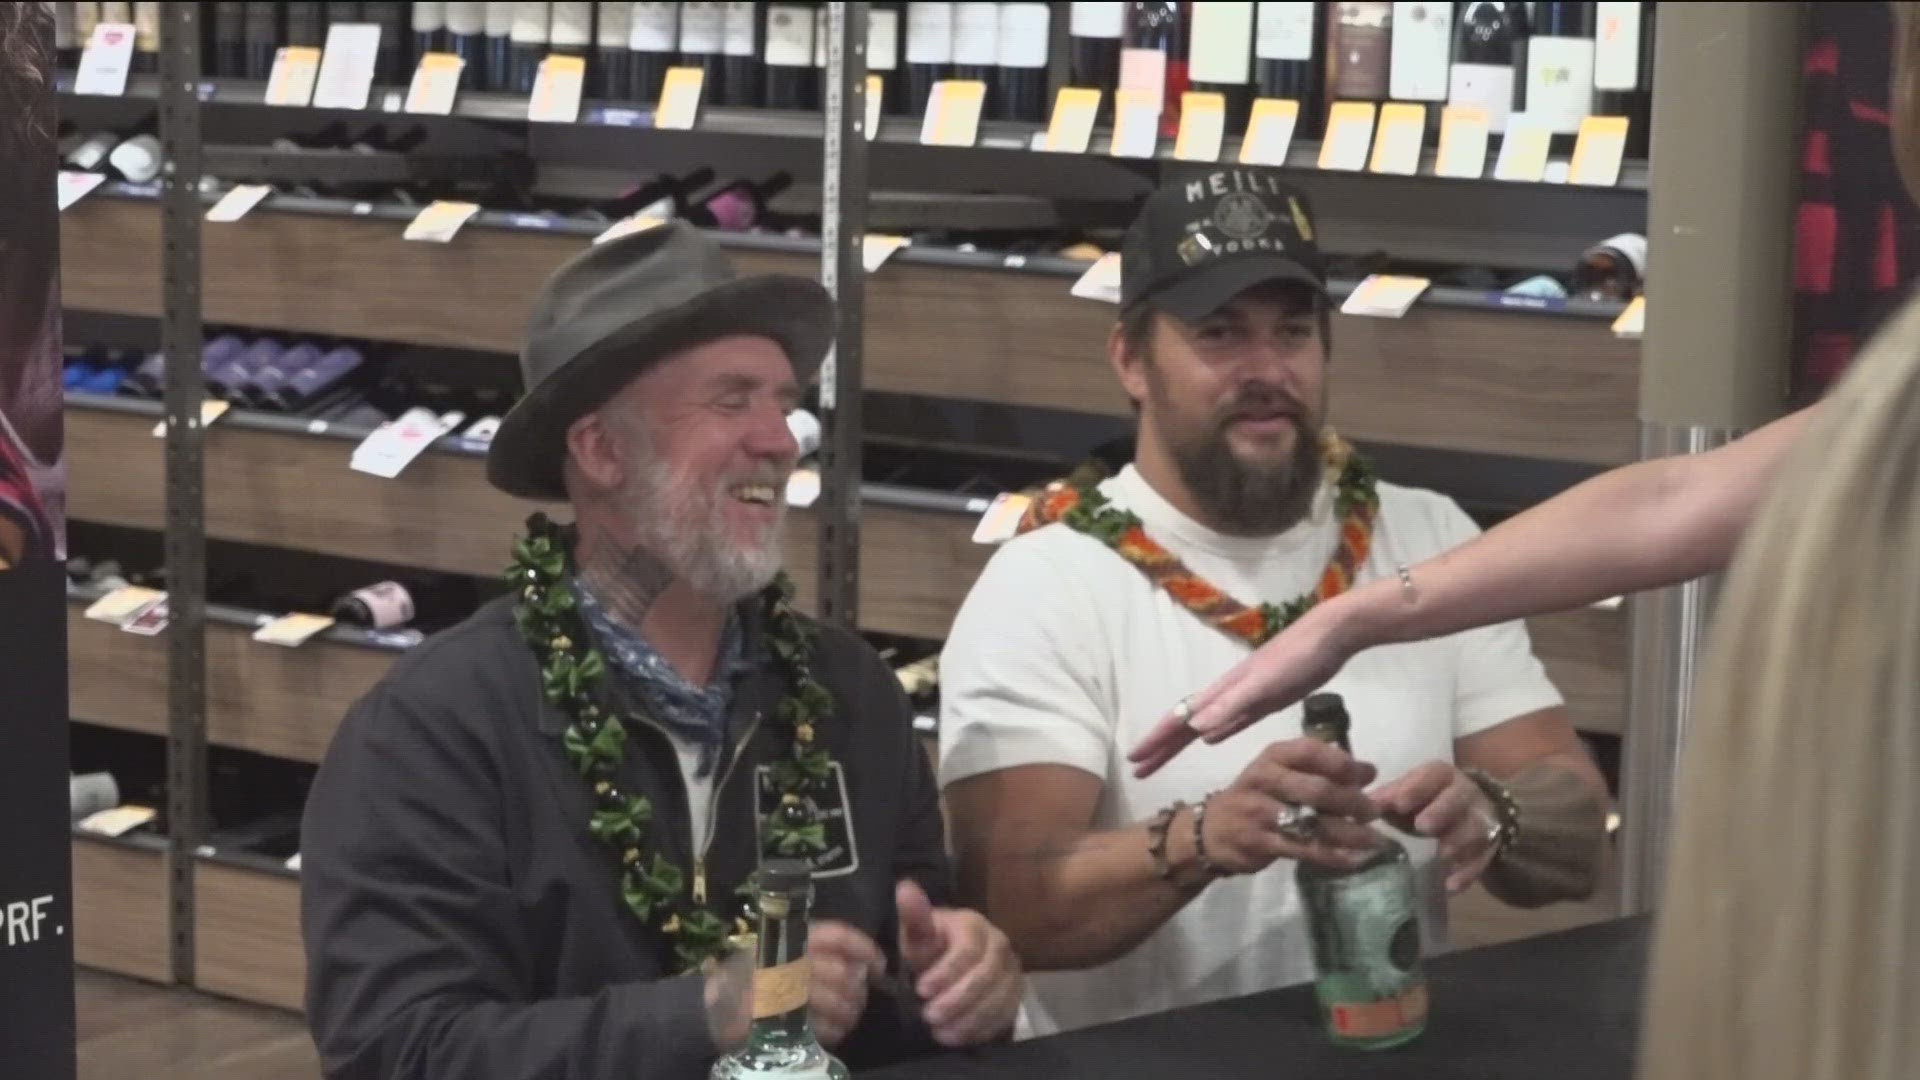 Jason Momoa, actor and DC superhero, stopped by Total Wine in Mission Valley and La Jolla on Monday.